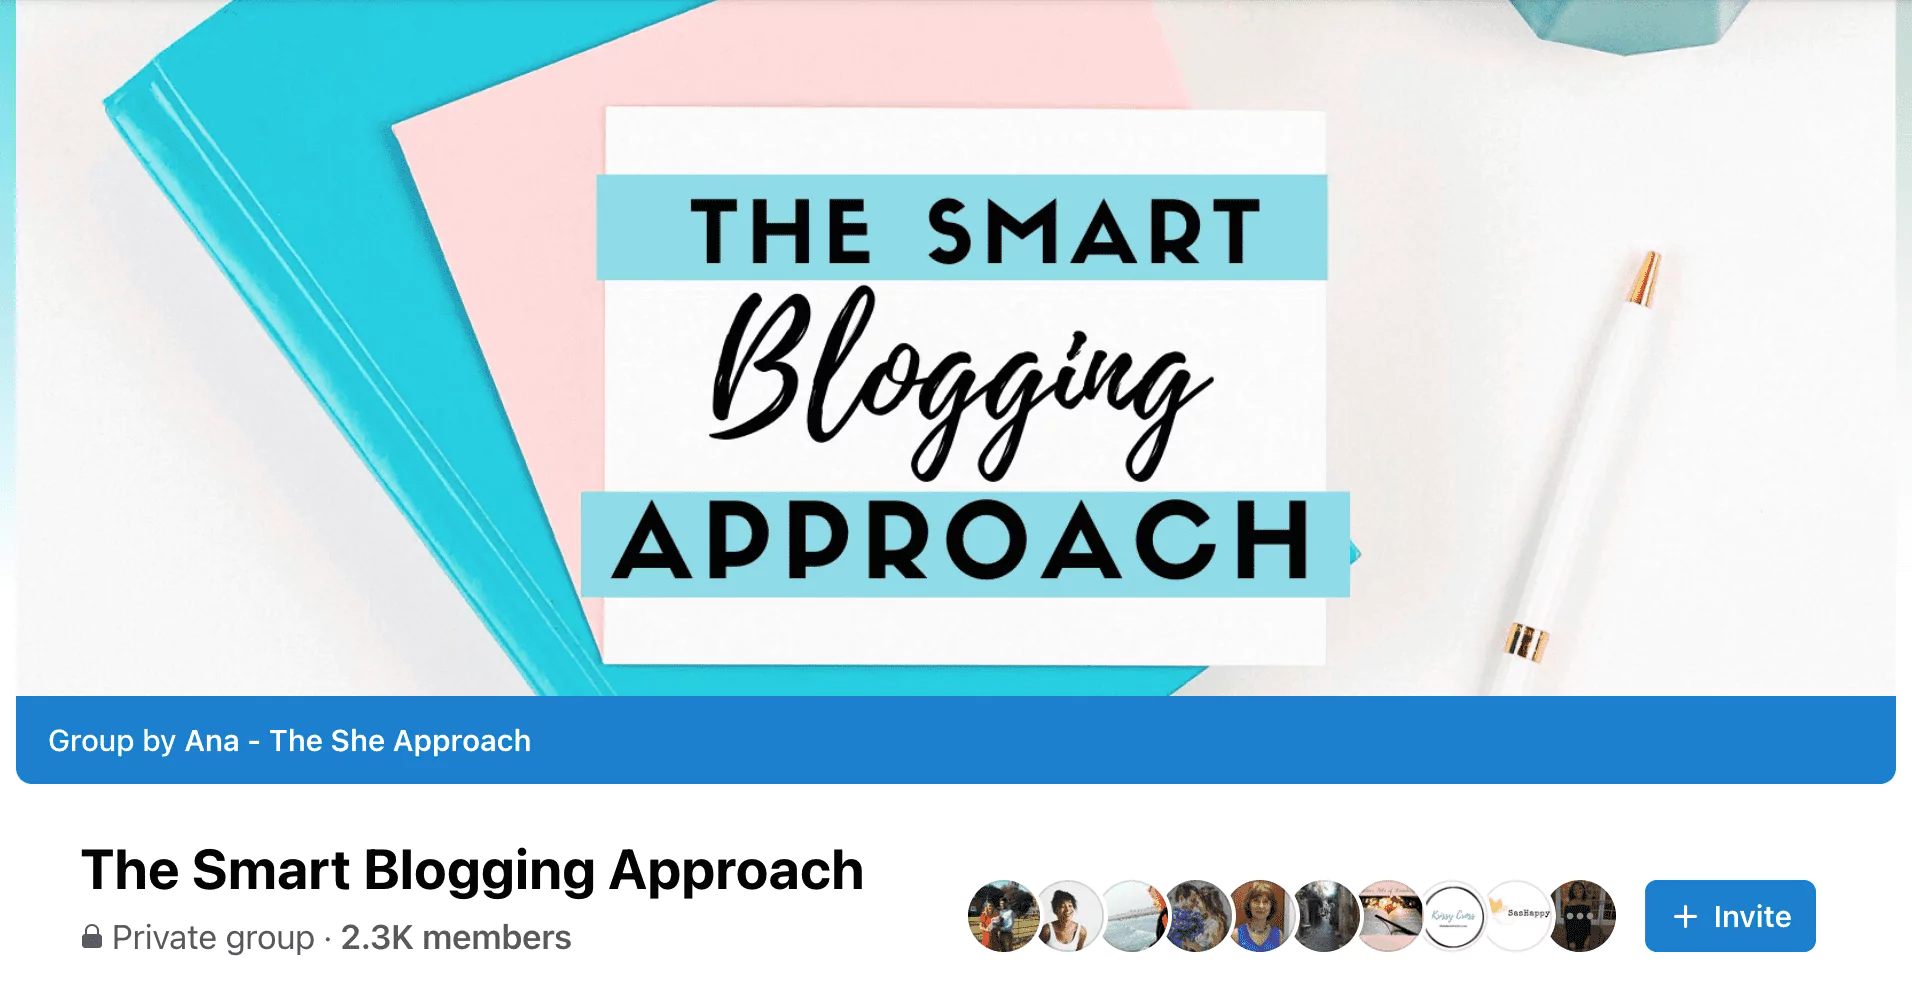 The Smart Blogging Approach